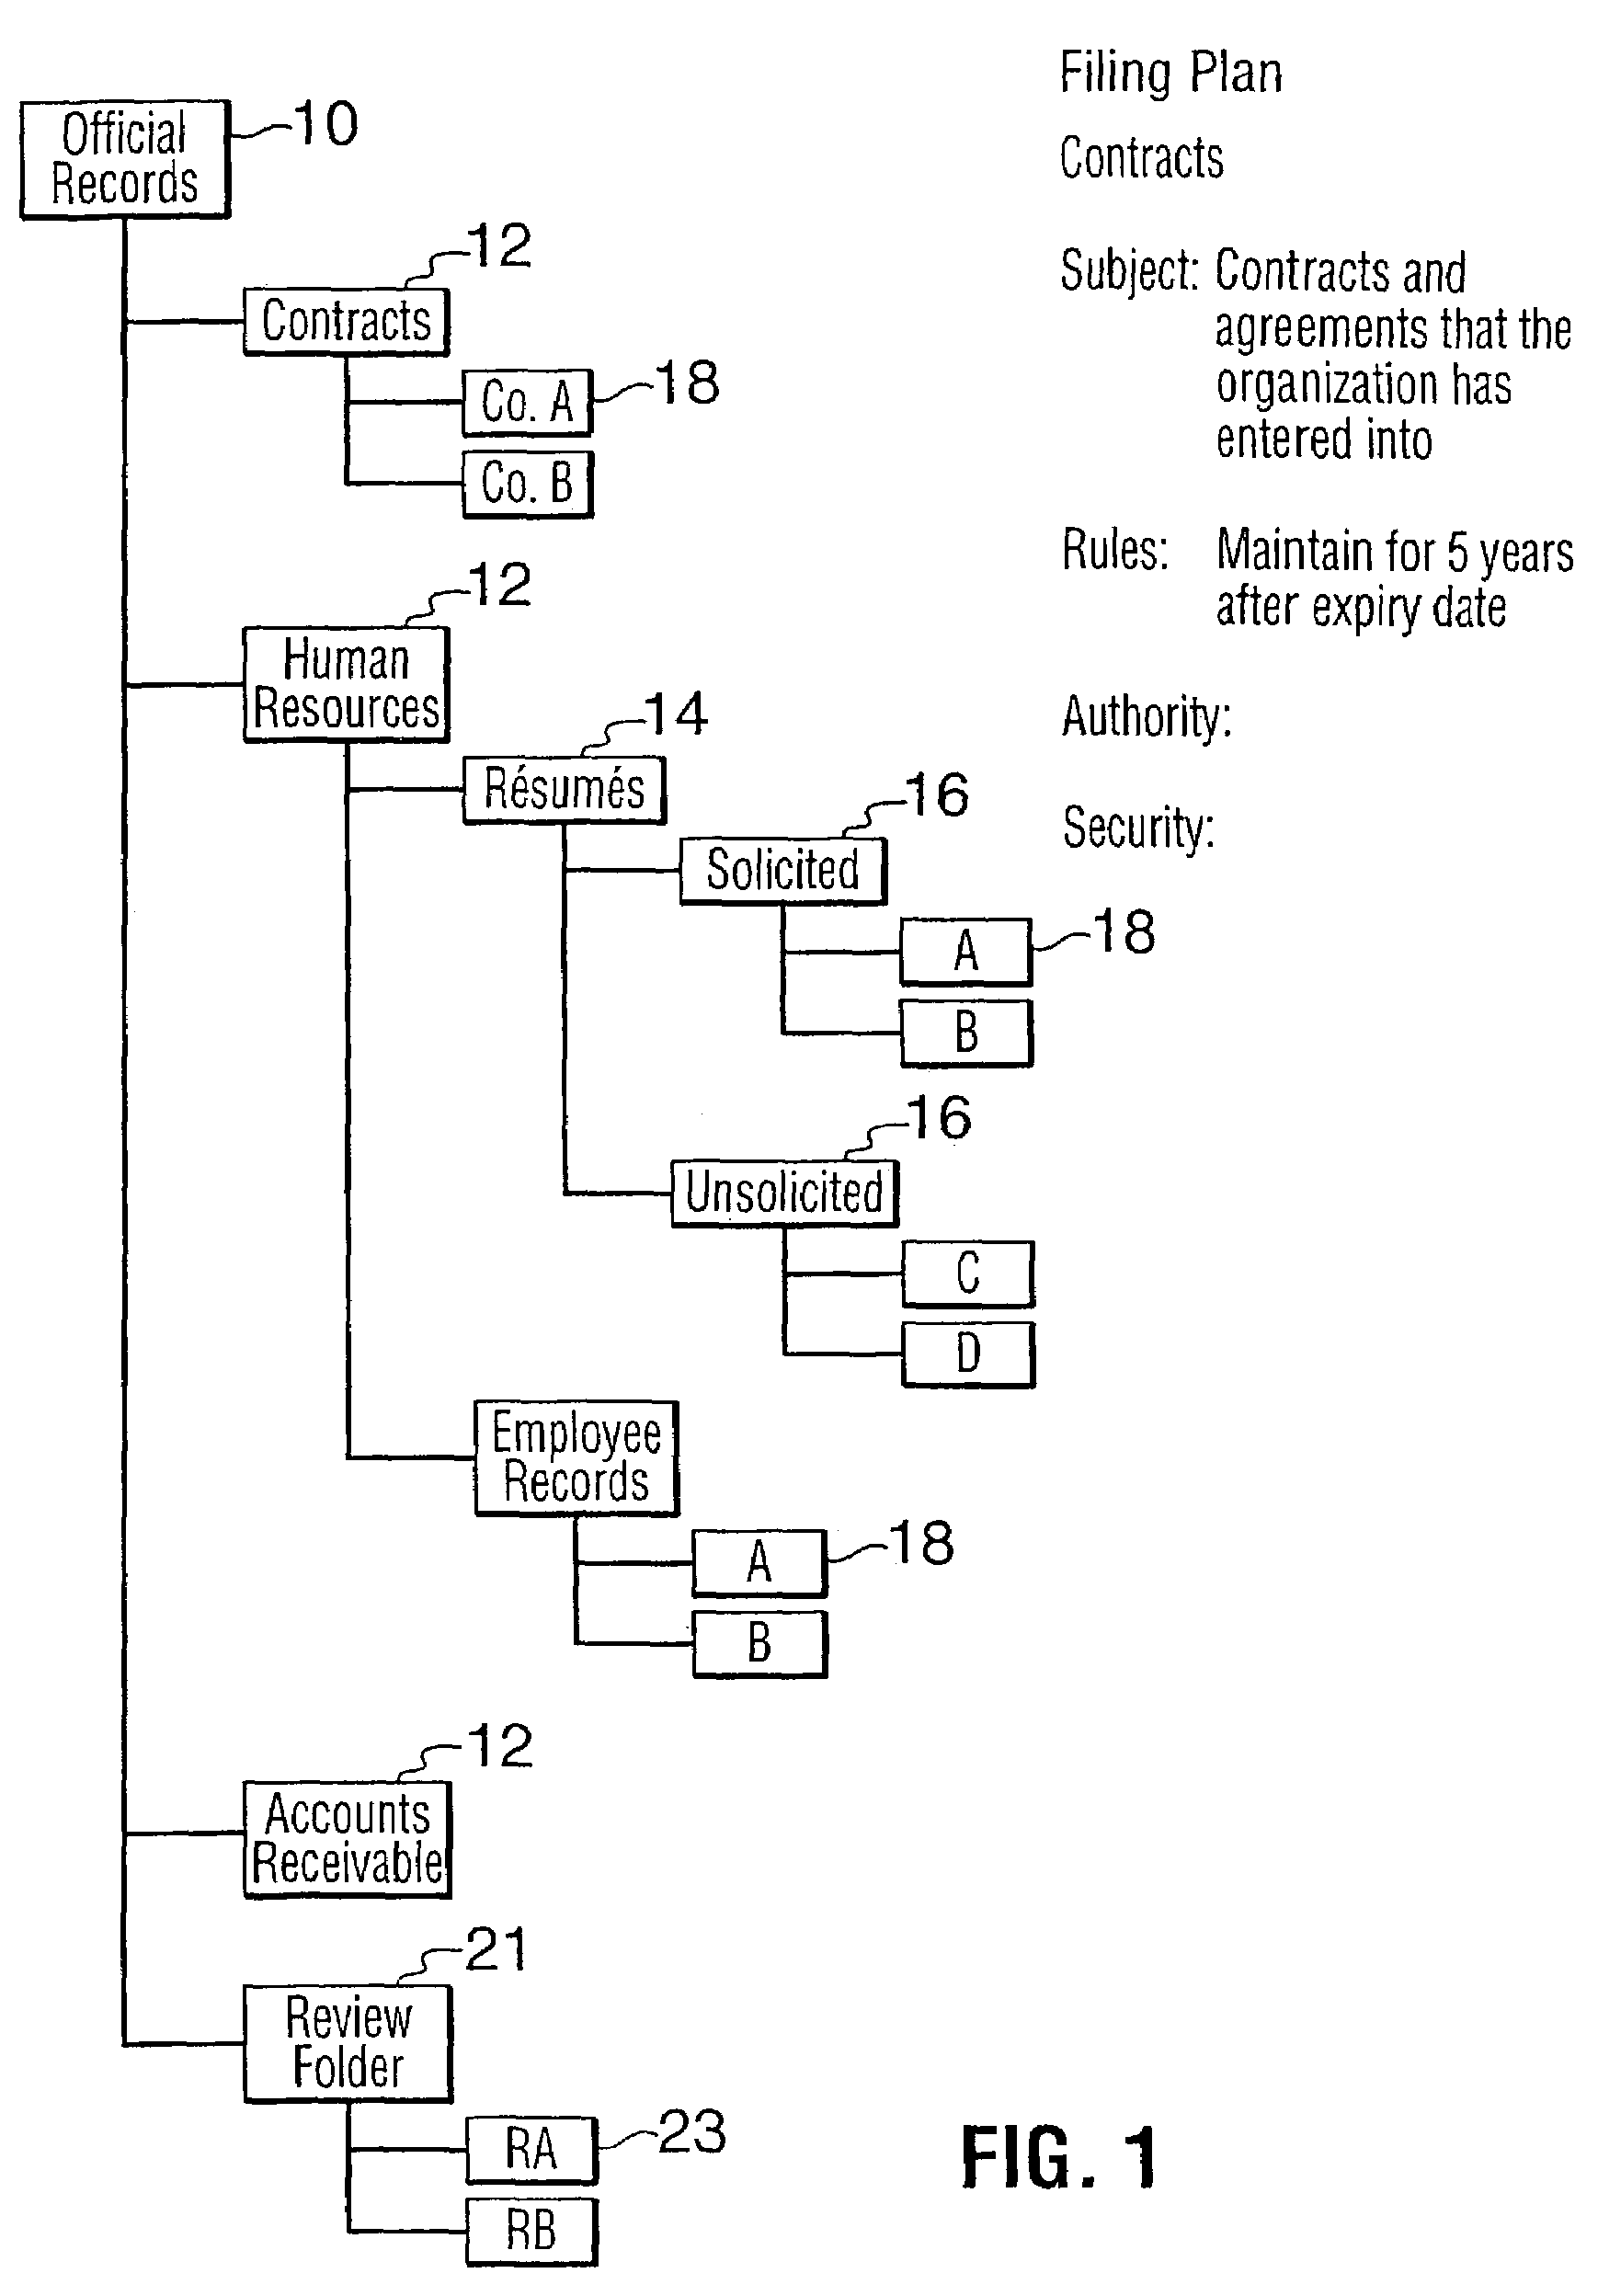 Computer readable electronic records automated classification system